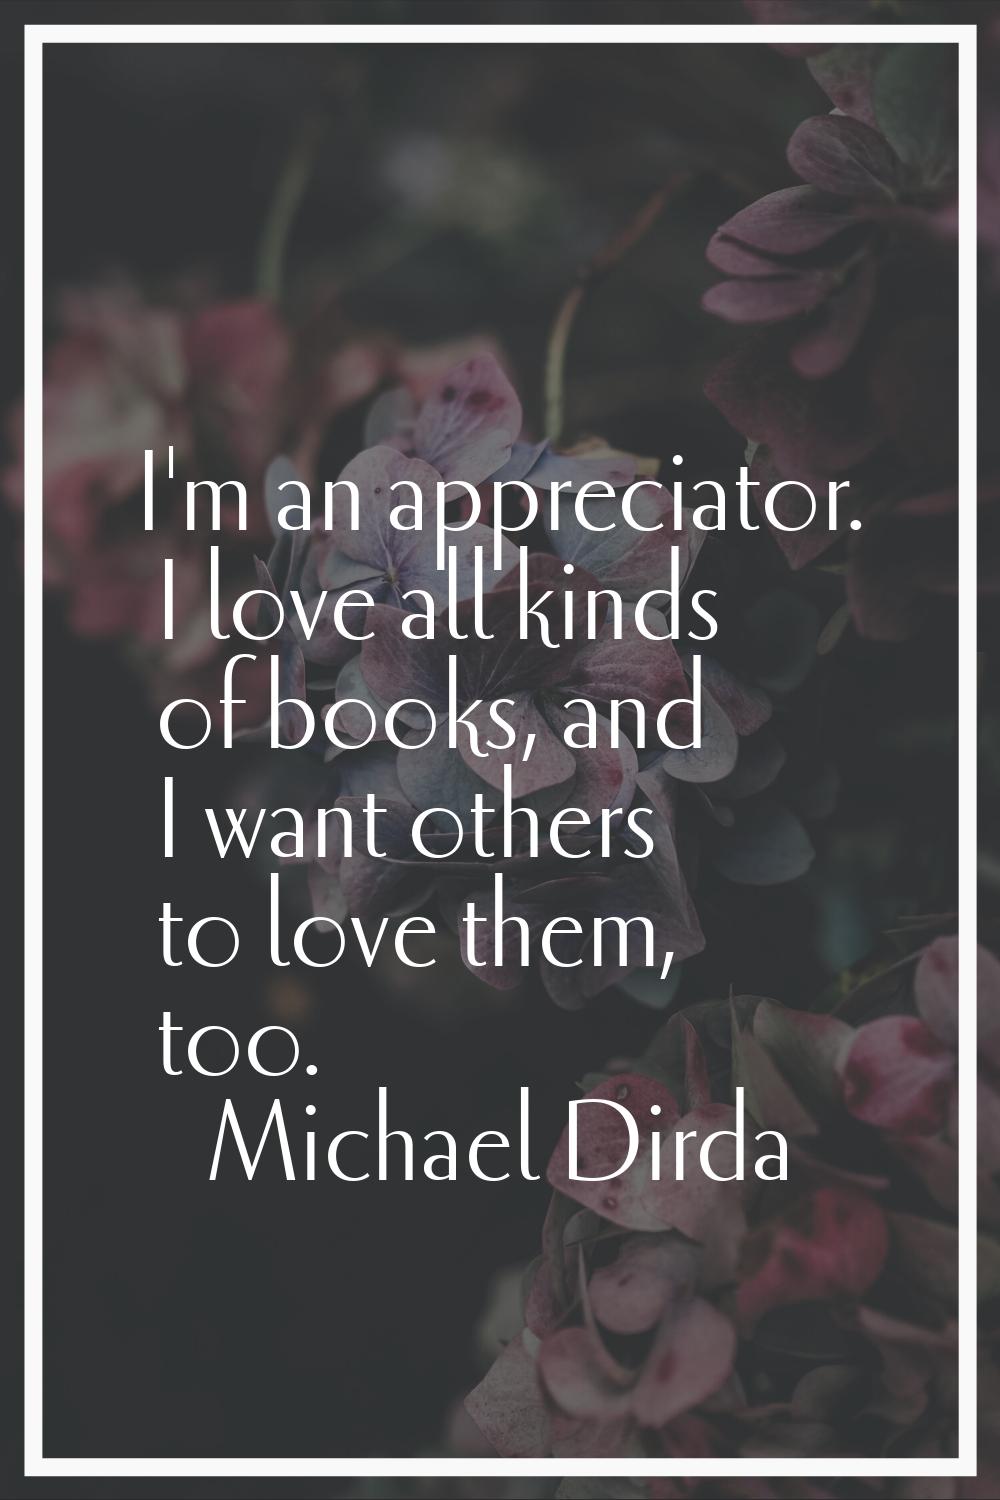 I'm an appreciator. I love all kinds of books, and I want others to love them, too.